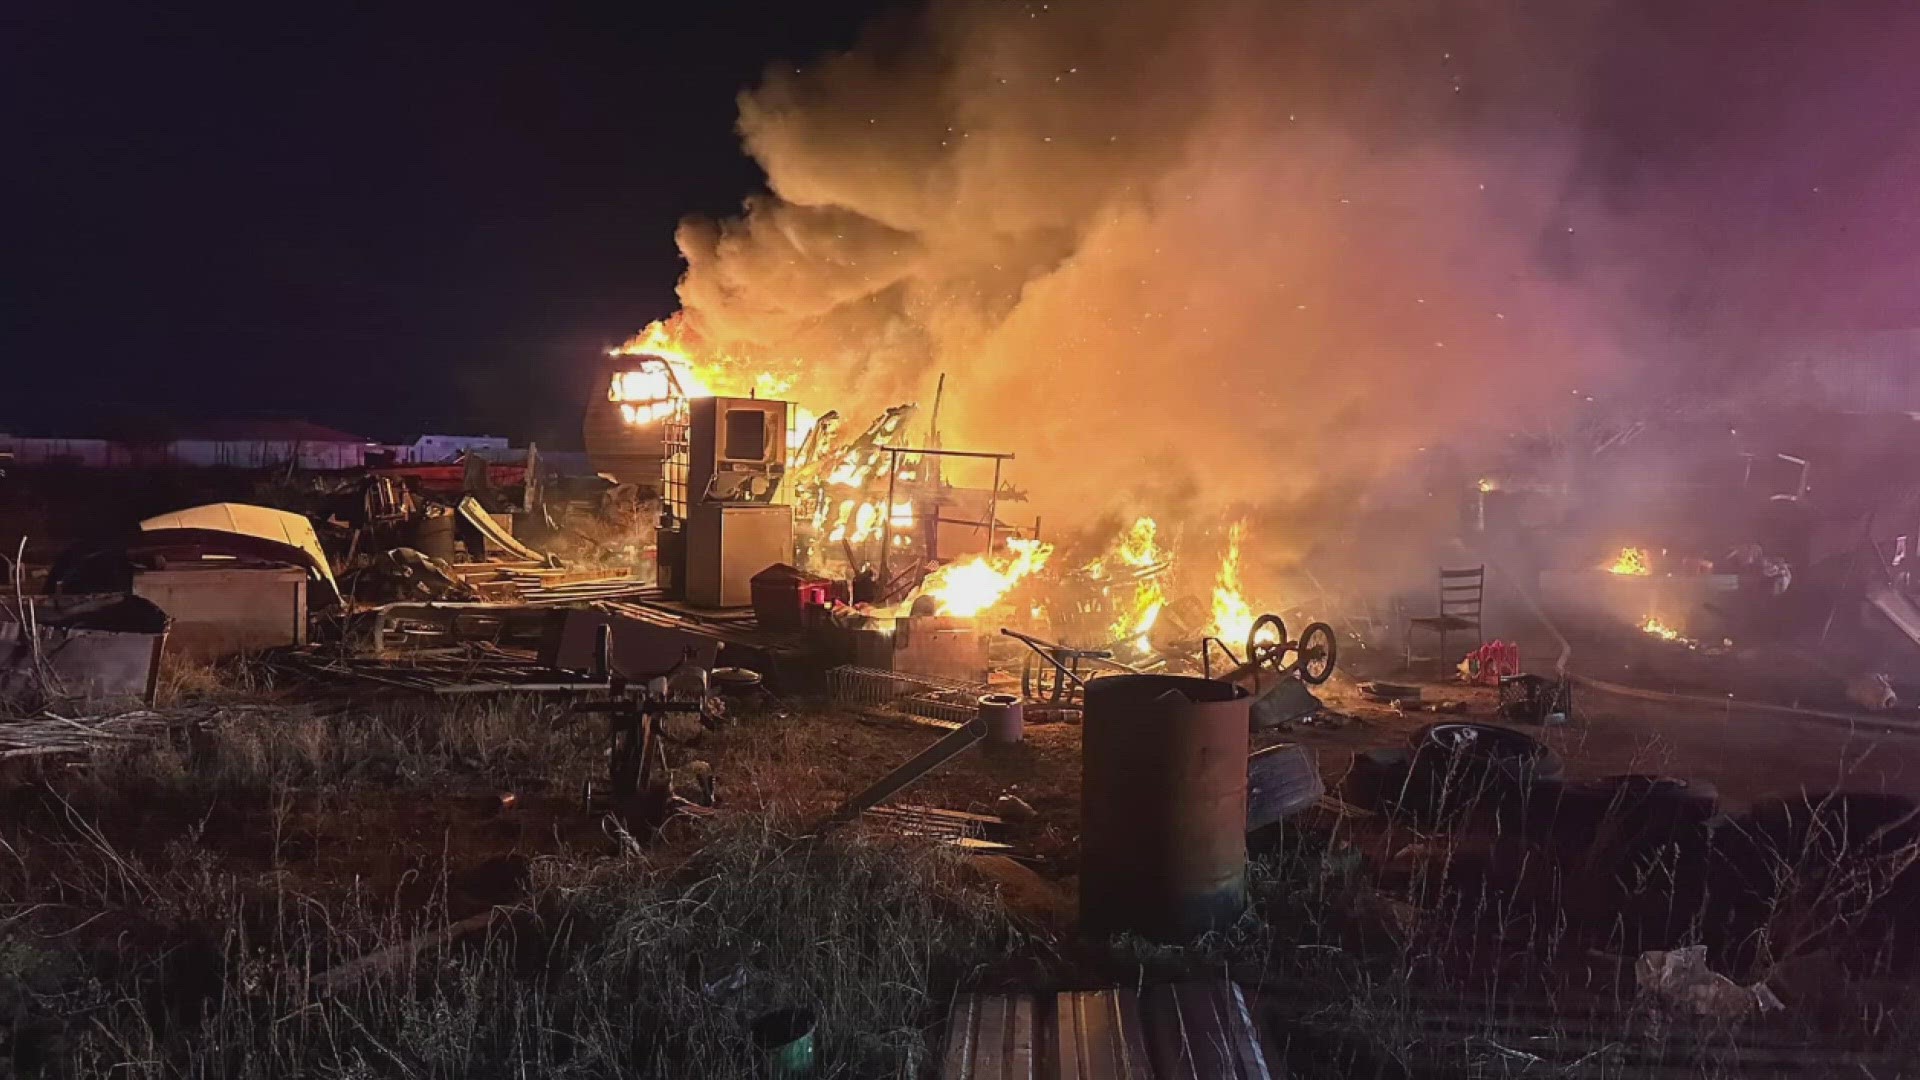 The City of Odessa says the Odessa Fire Rescue found a fifth-wheel RV and the surrounding area on fire Wednesday night. No injuries were reported.